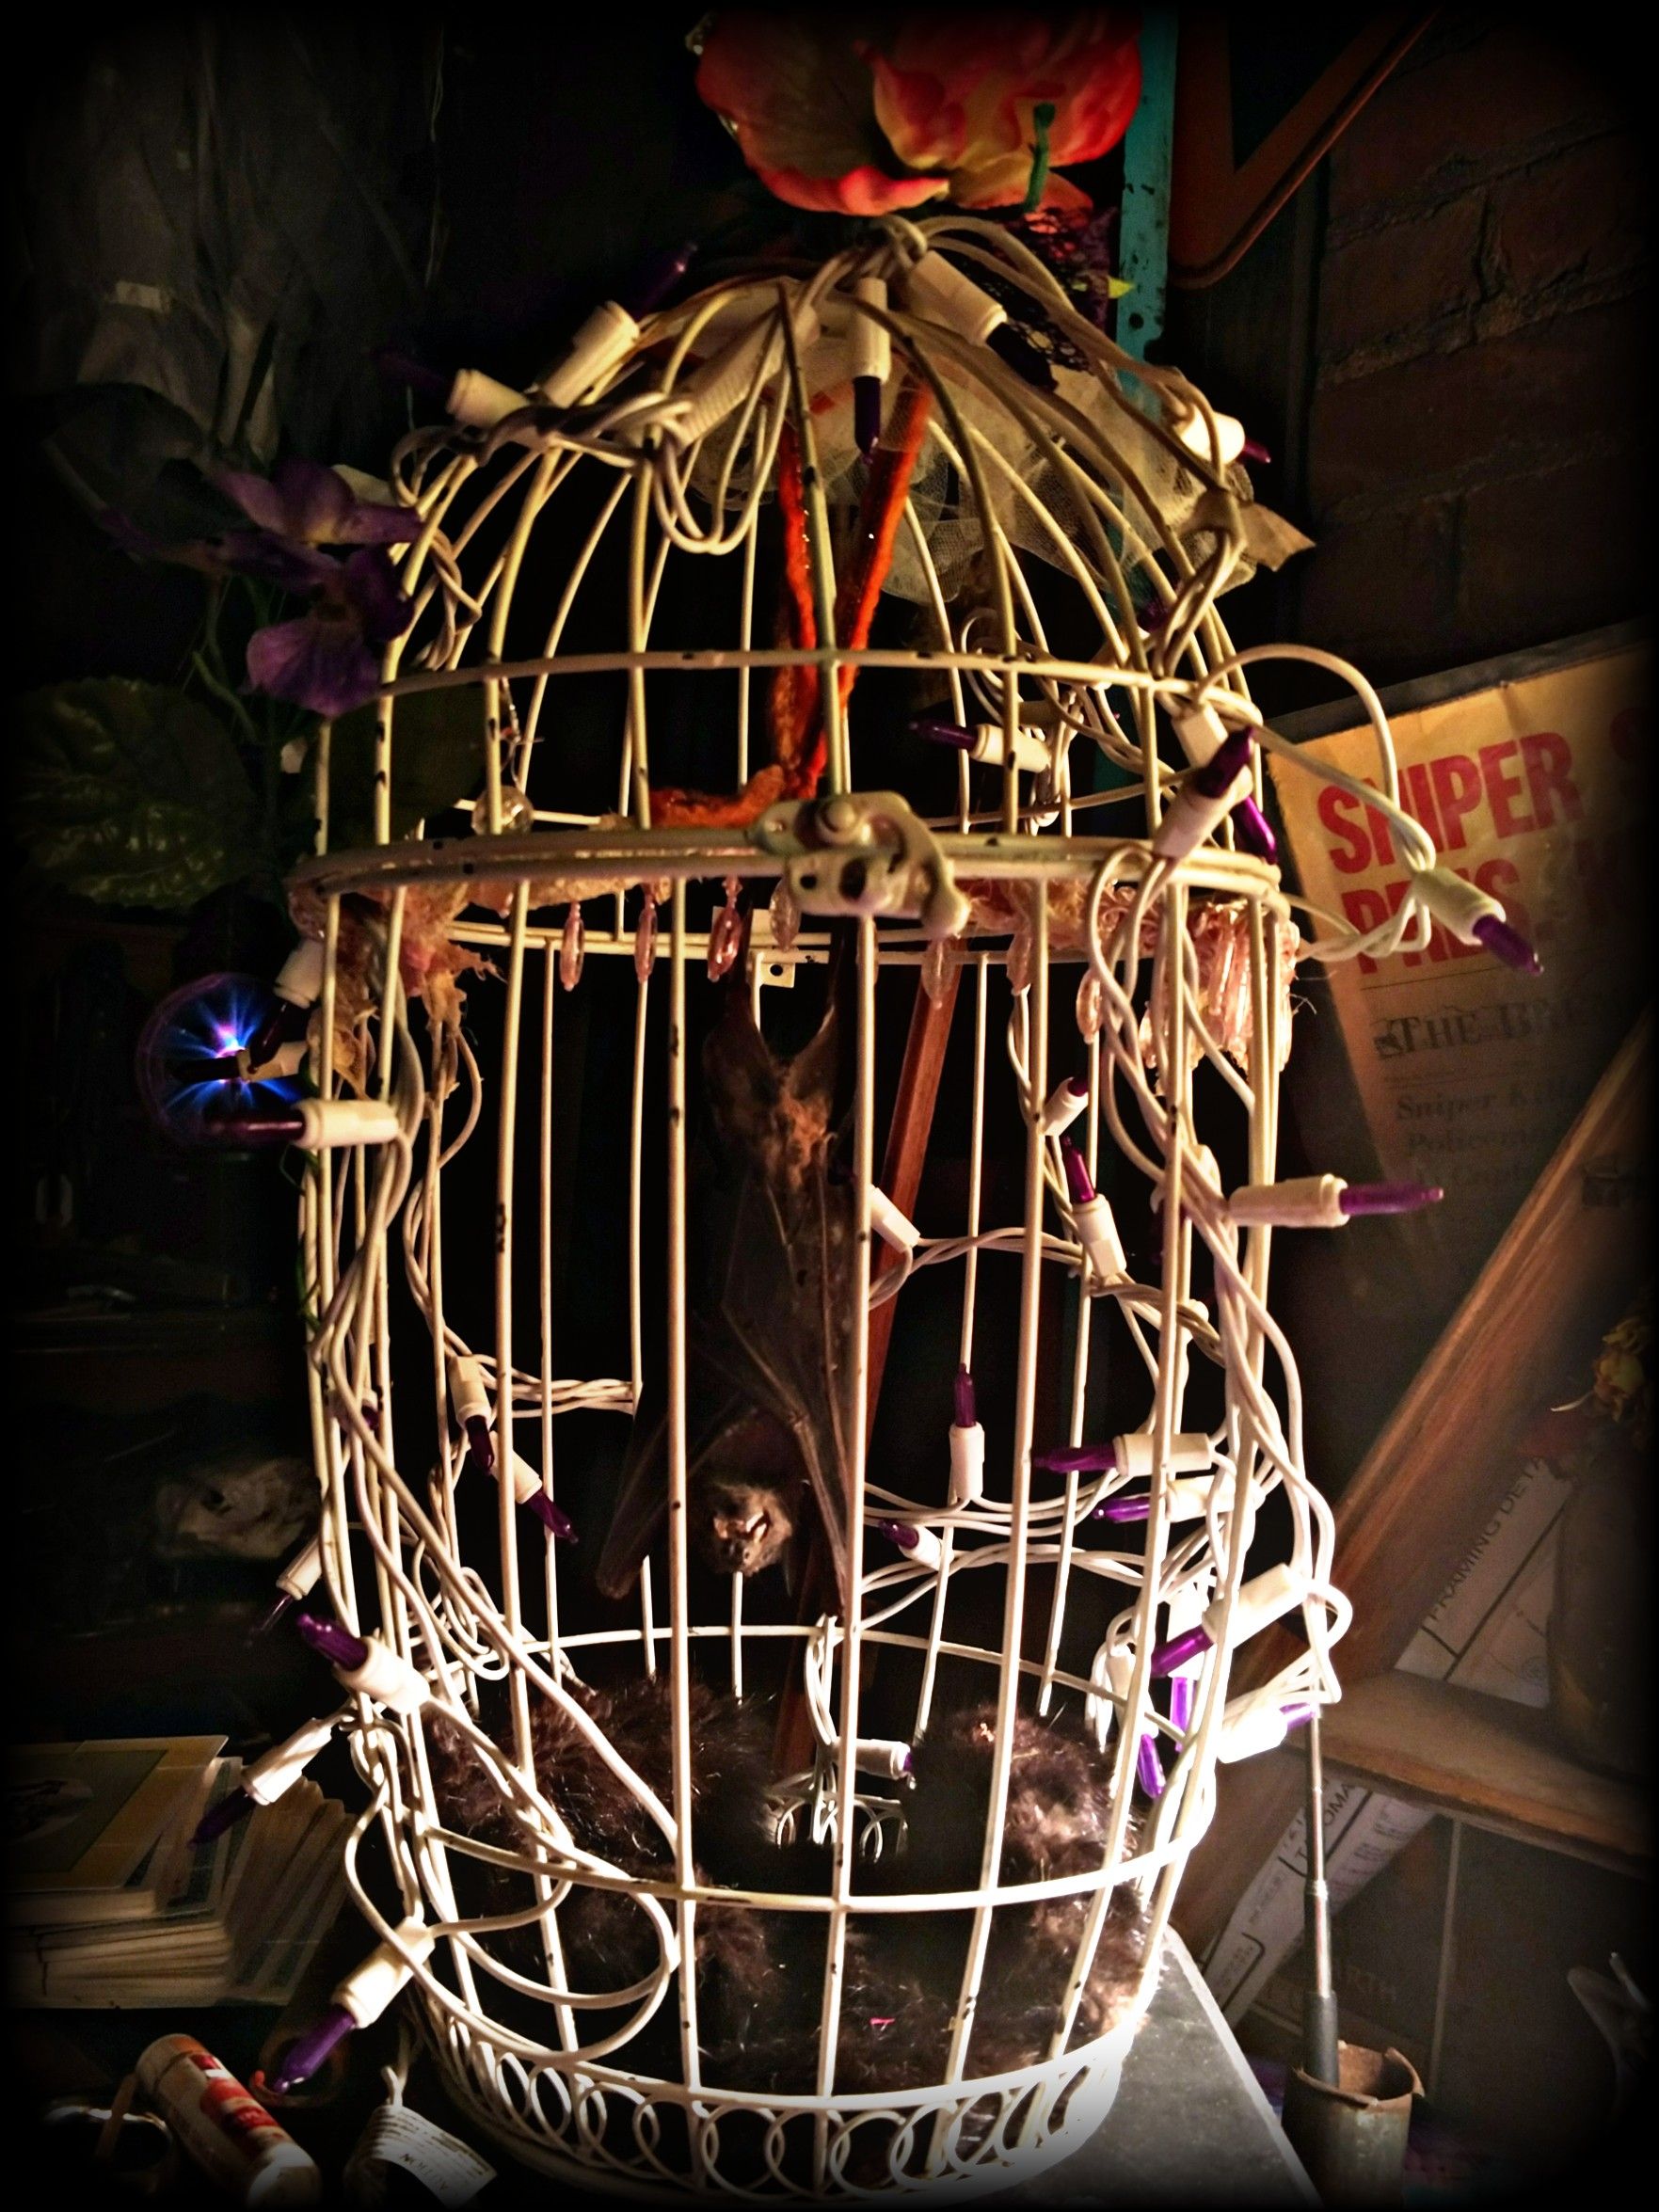 Bat in a cage filled with rage. Curiosities art